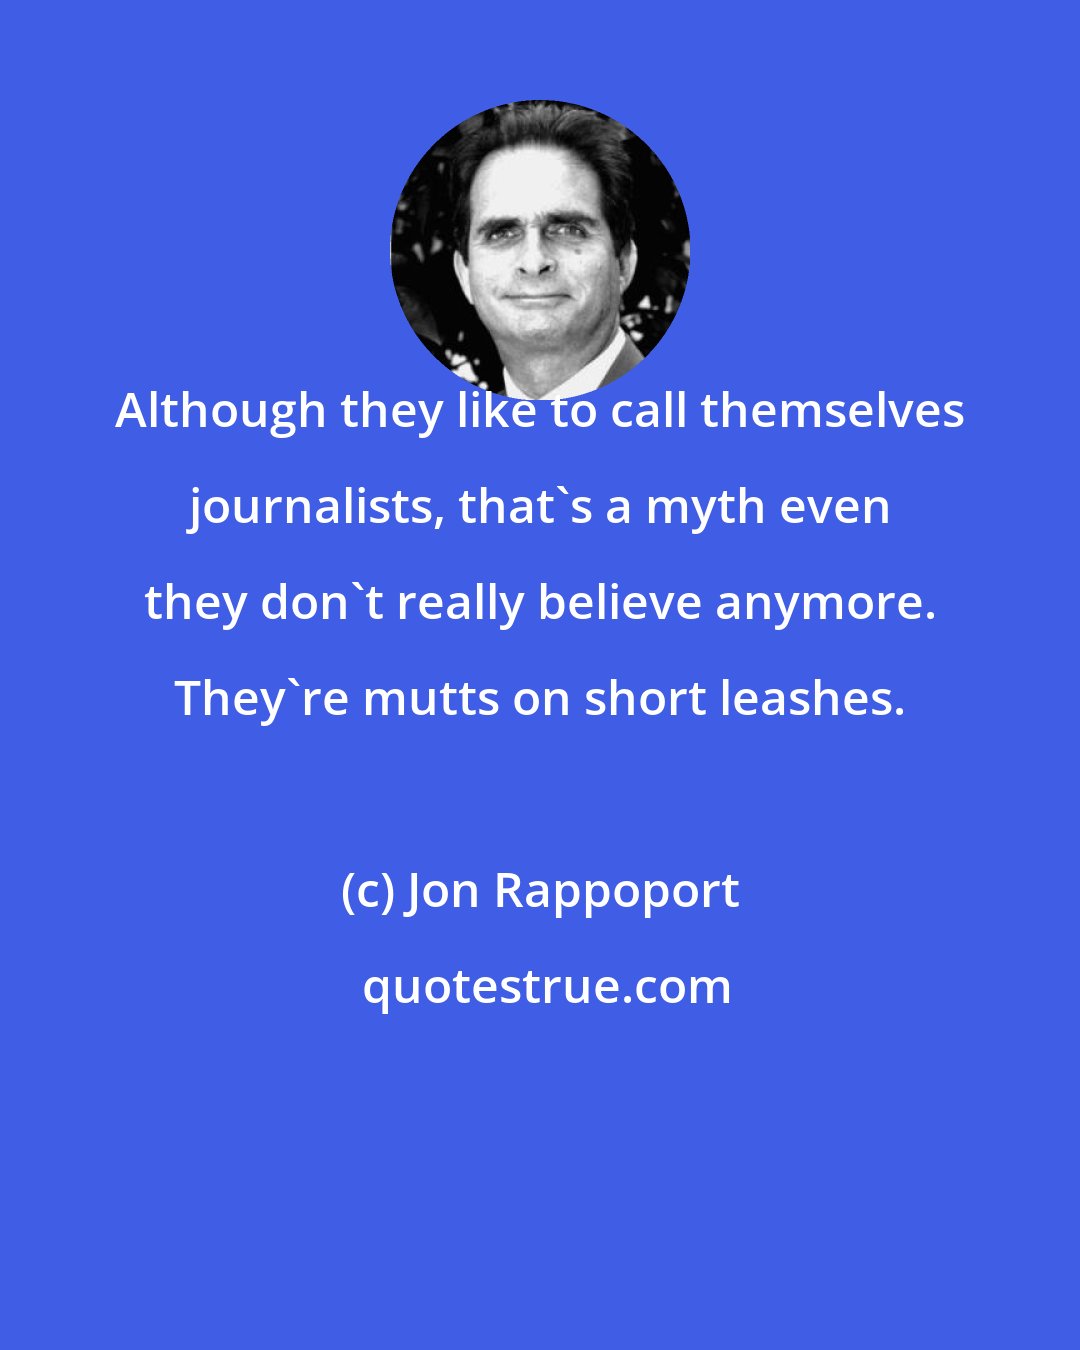 Jon Rappoport: Although they like to call themselves journalists, that's a myth even they don't really believe anymore. They're mutts on short leashes.